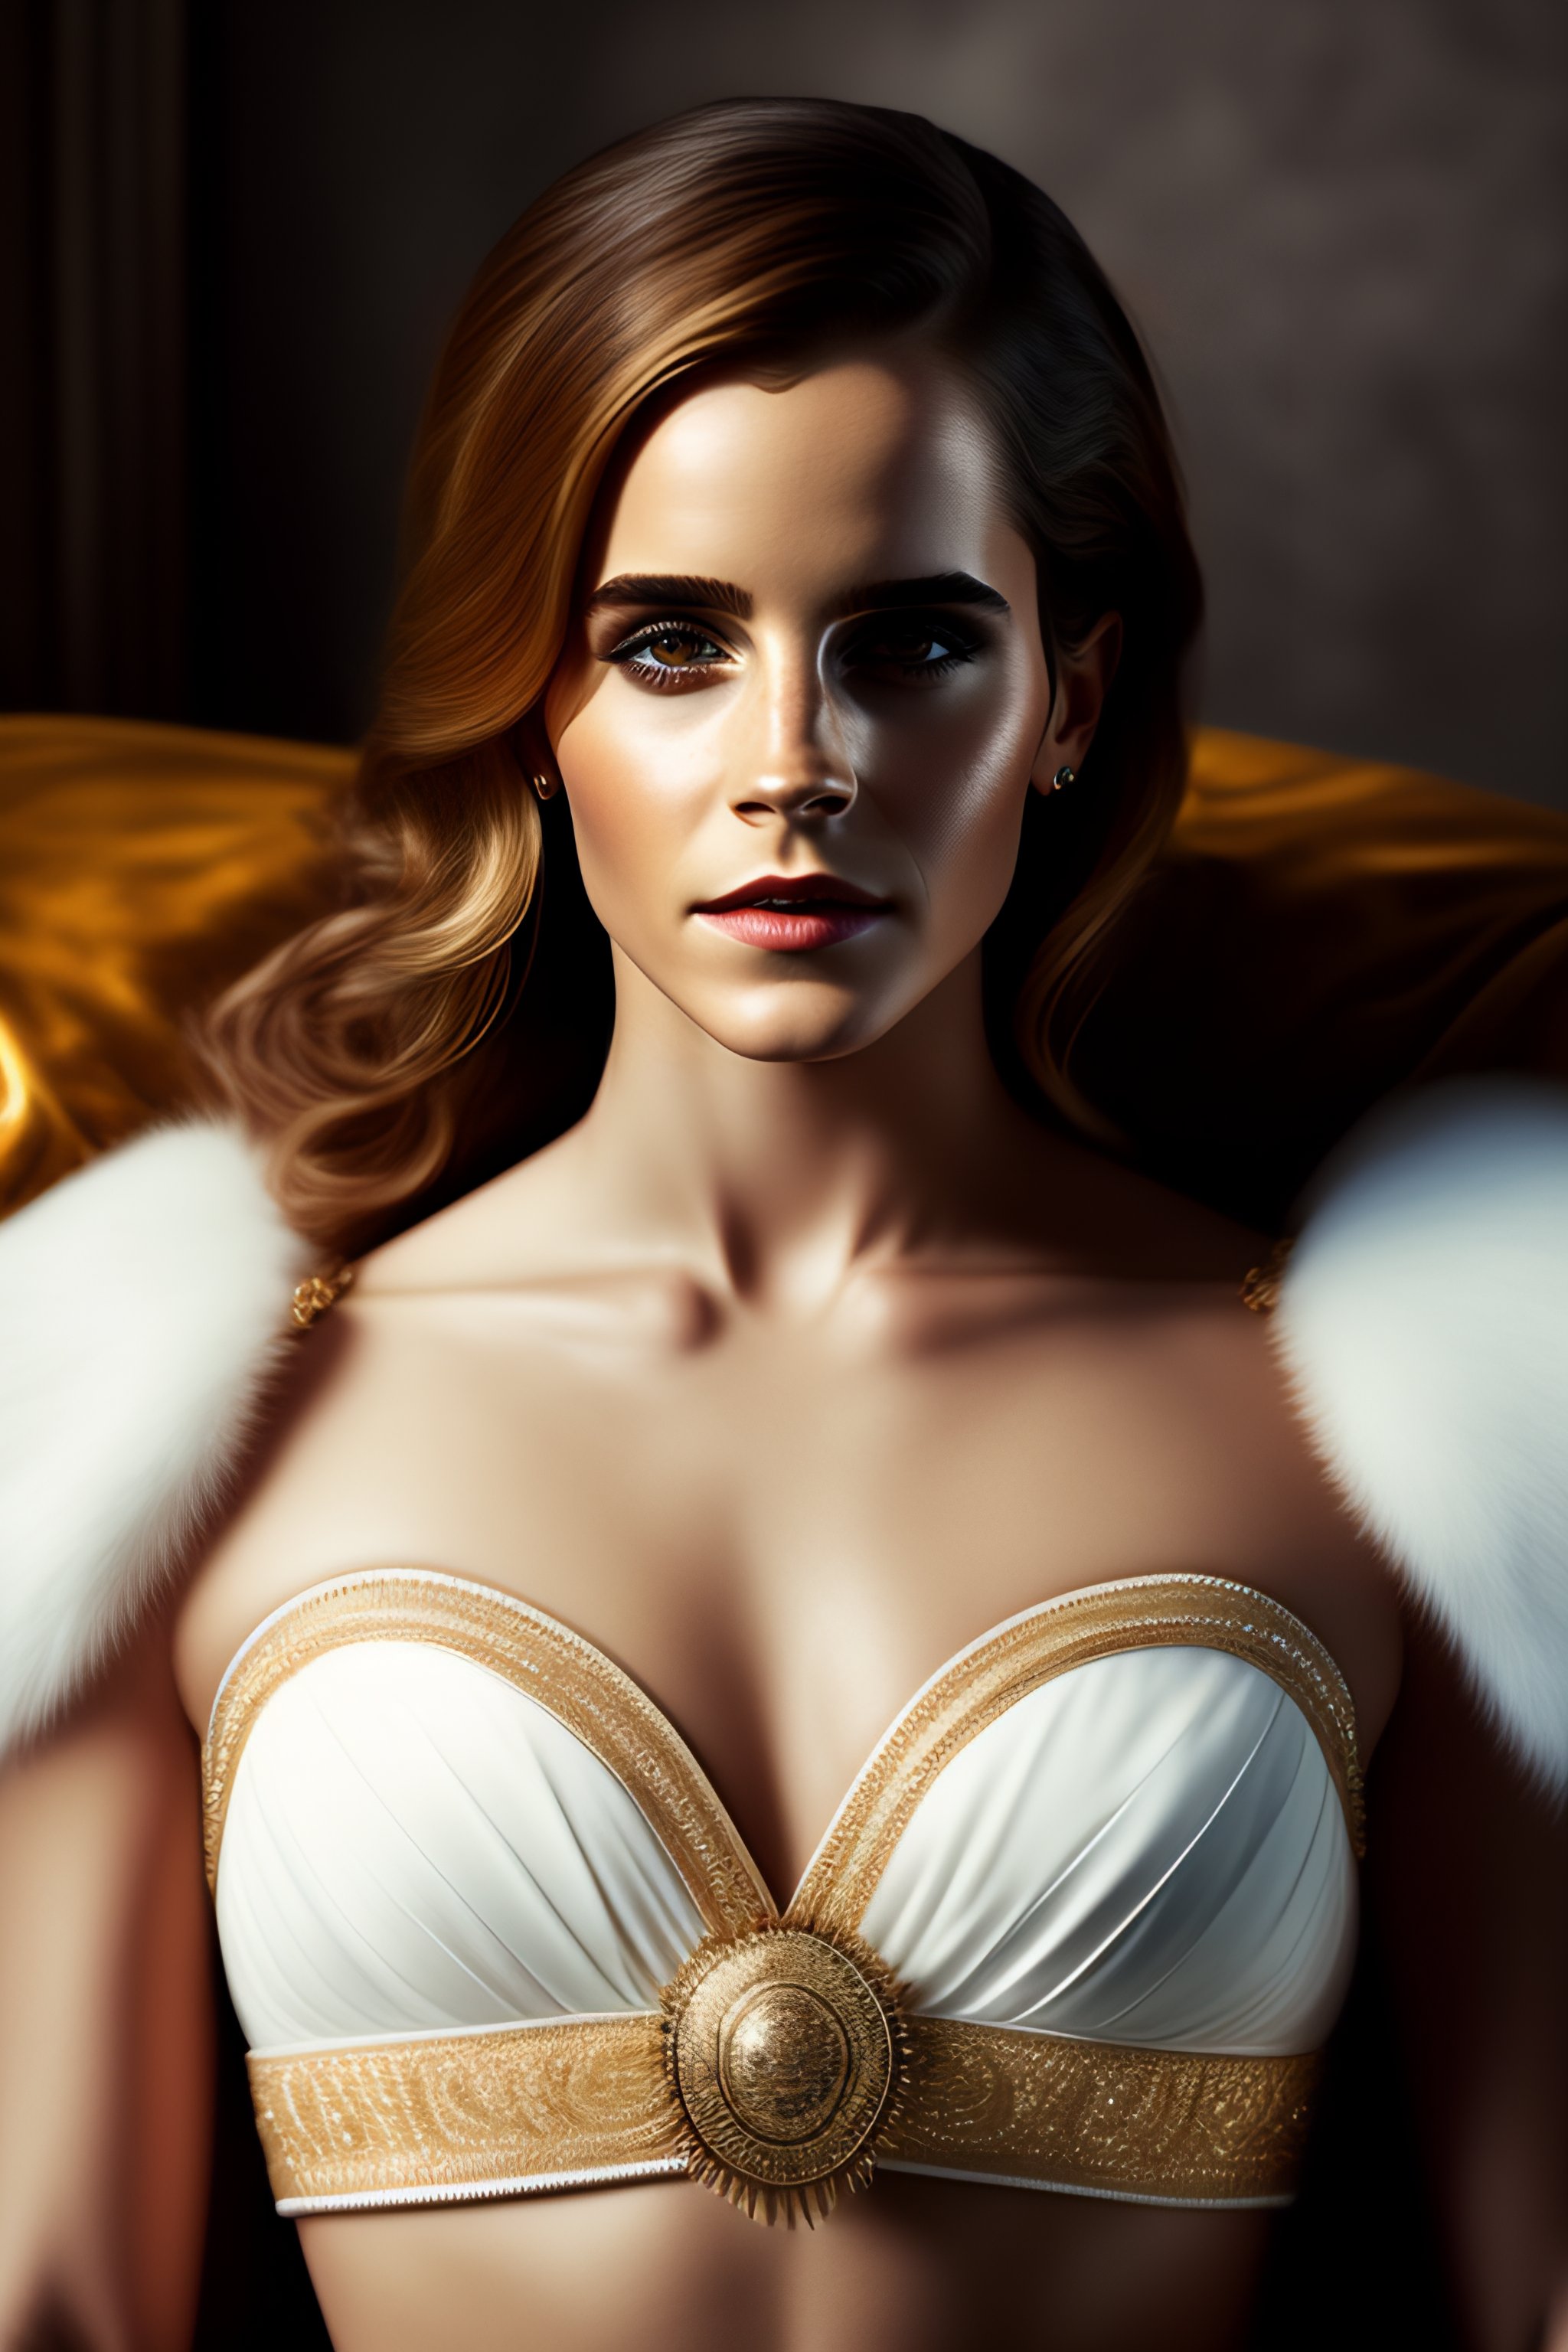 Lexica Full Body Of Emma Watson As A Warrior Goddes Prominent Chest Stunningly Beautiful